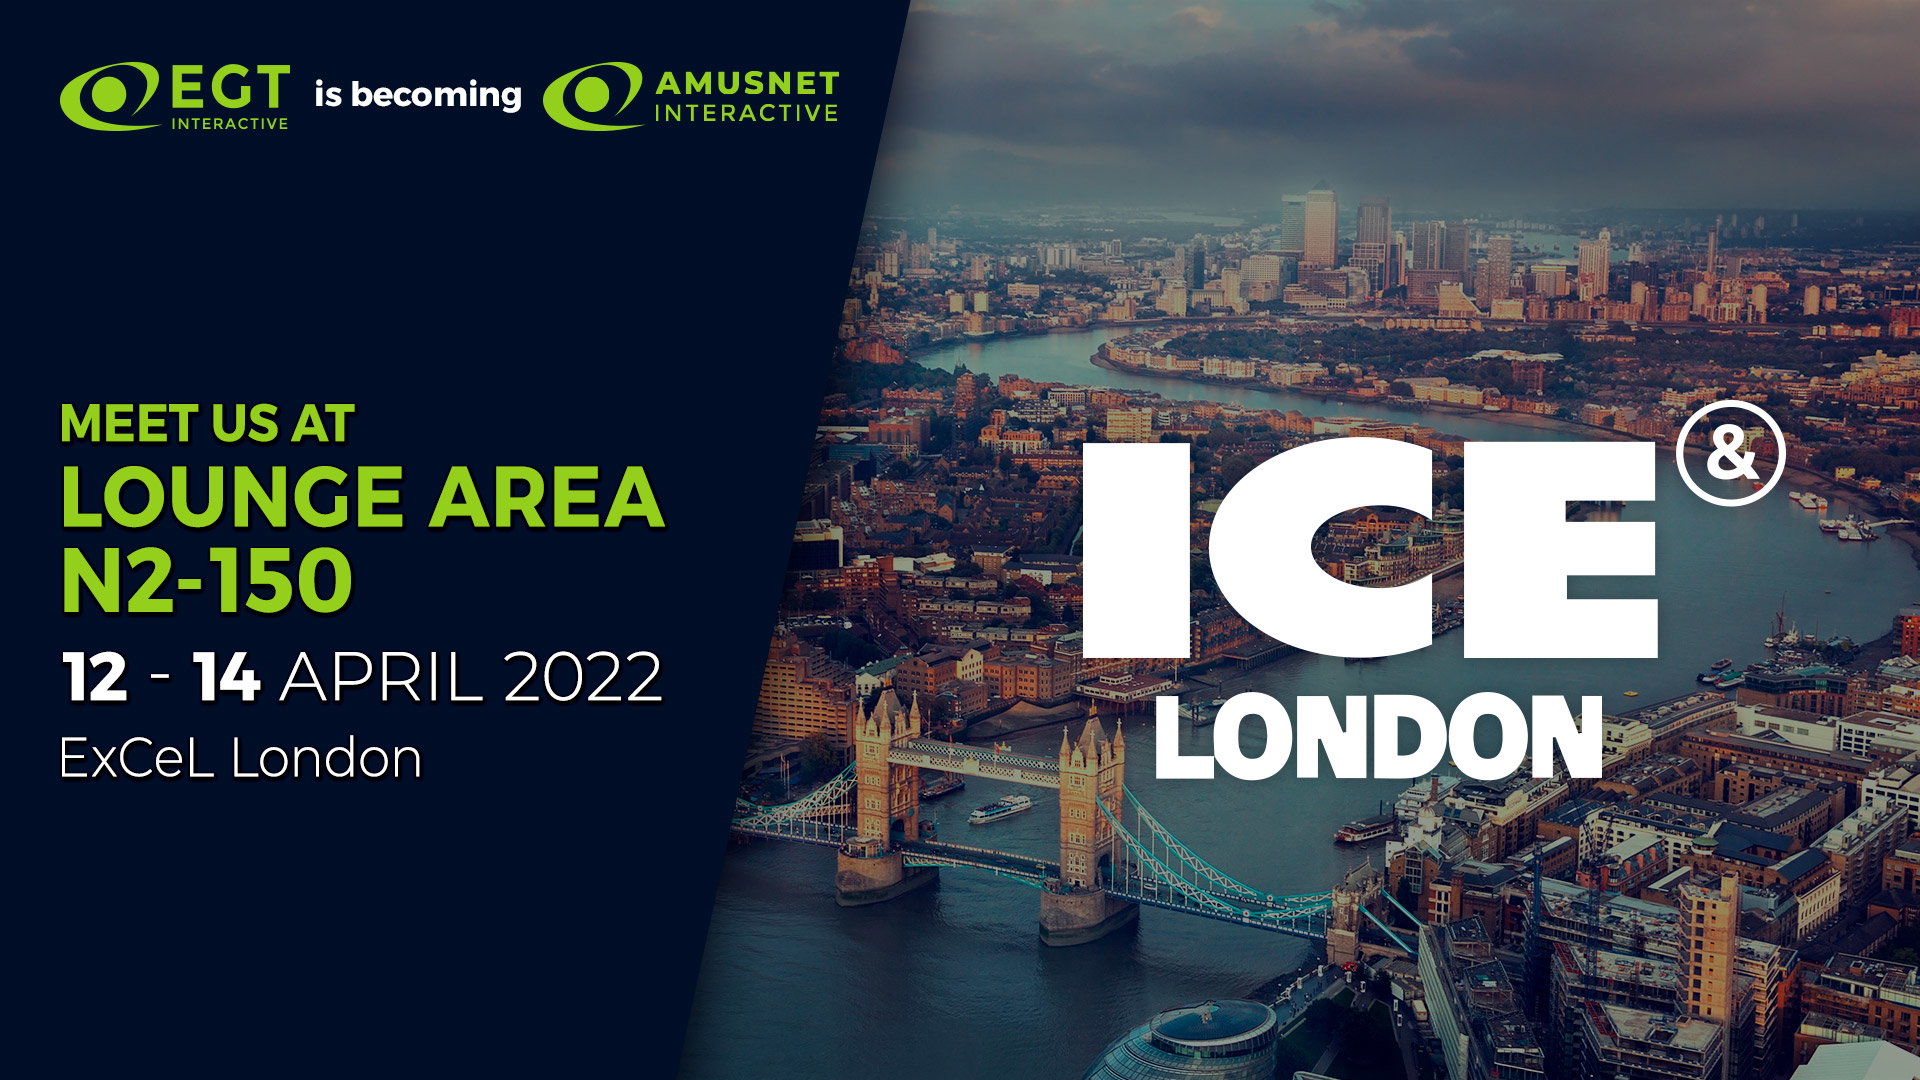 The EGT future of gaming, manifested at ICE London 2020